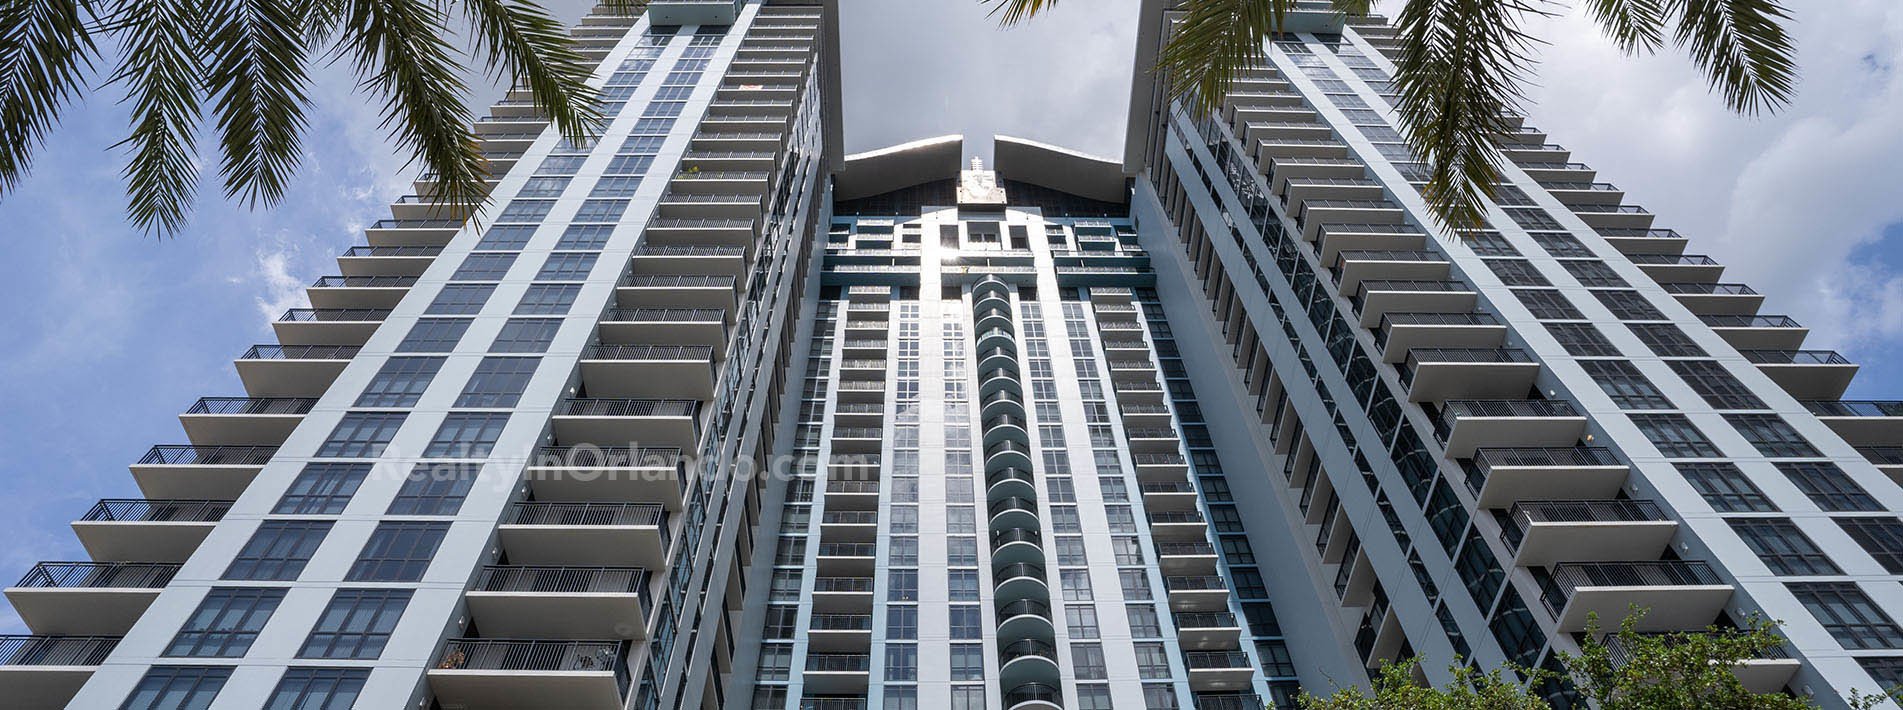 55 West Downtown Orlando Condos for Sale